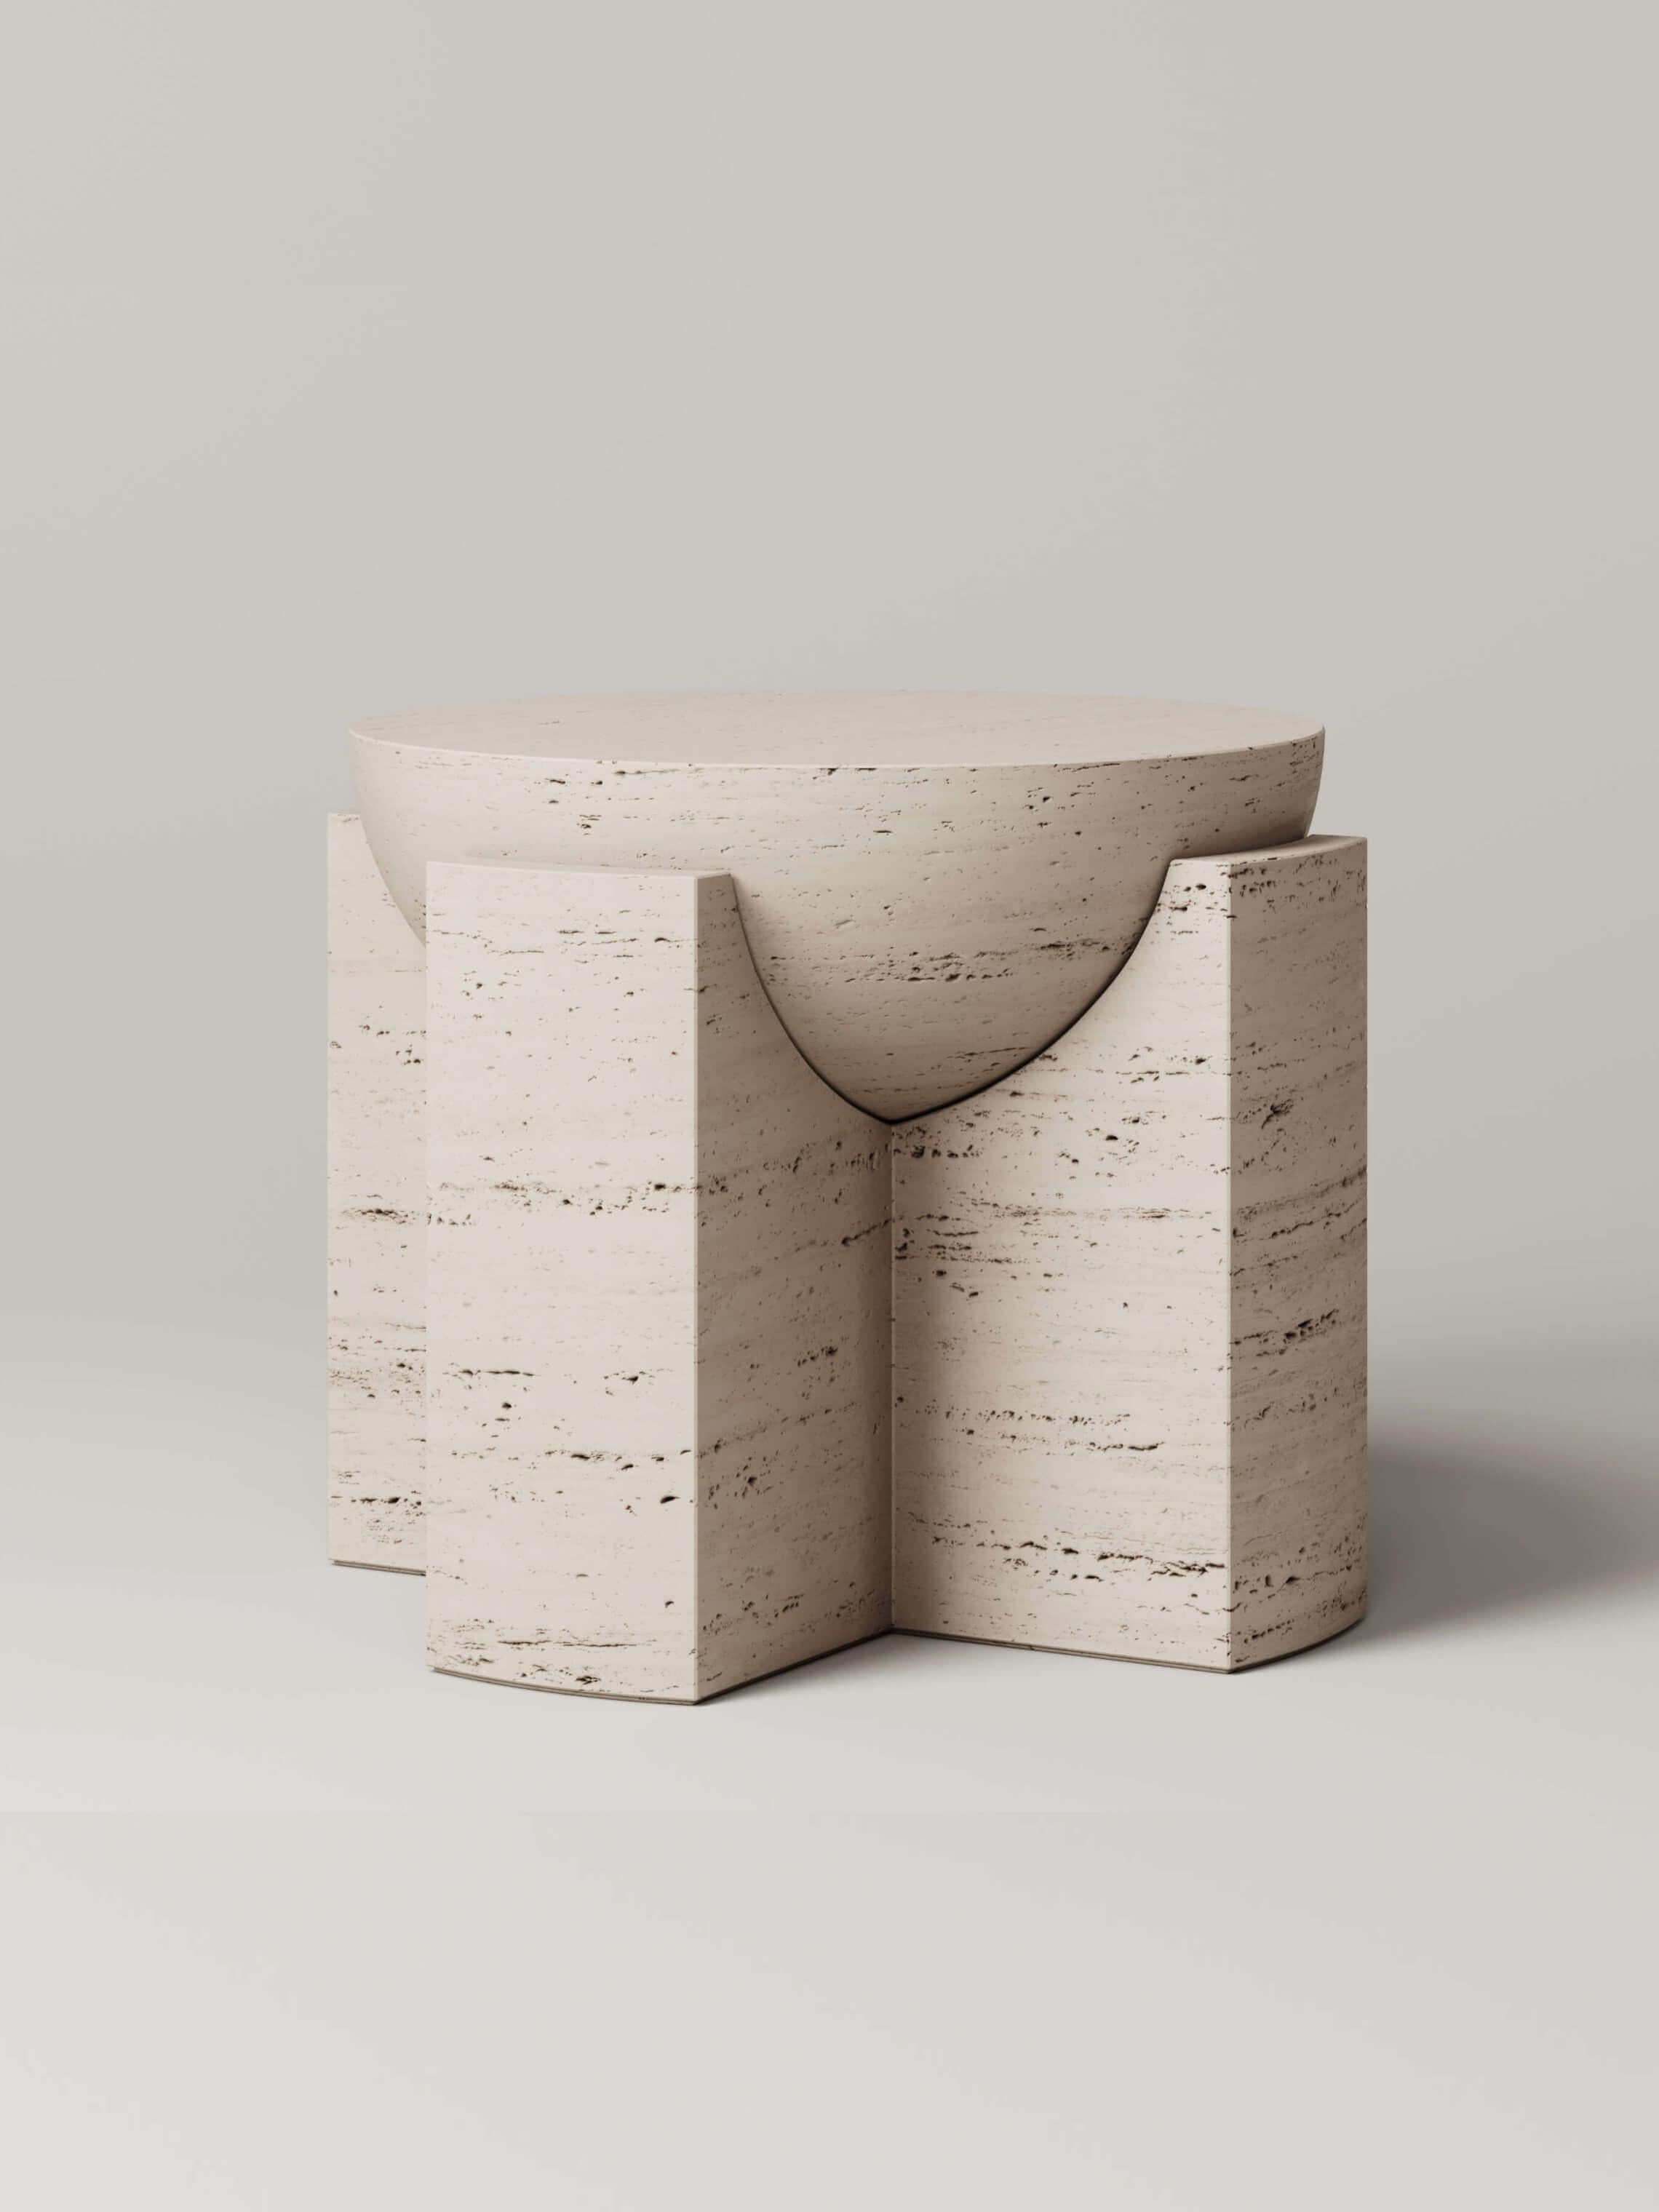 Composed of two pieces of carved stone, the half-dome sphere of the M_002 side table floats effortlessly within its base. The sculptural and heavily proportioned form is simultaneously a functional object and a piece of art.

Designed by Studio Le